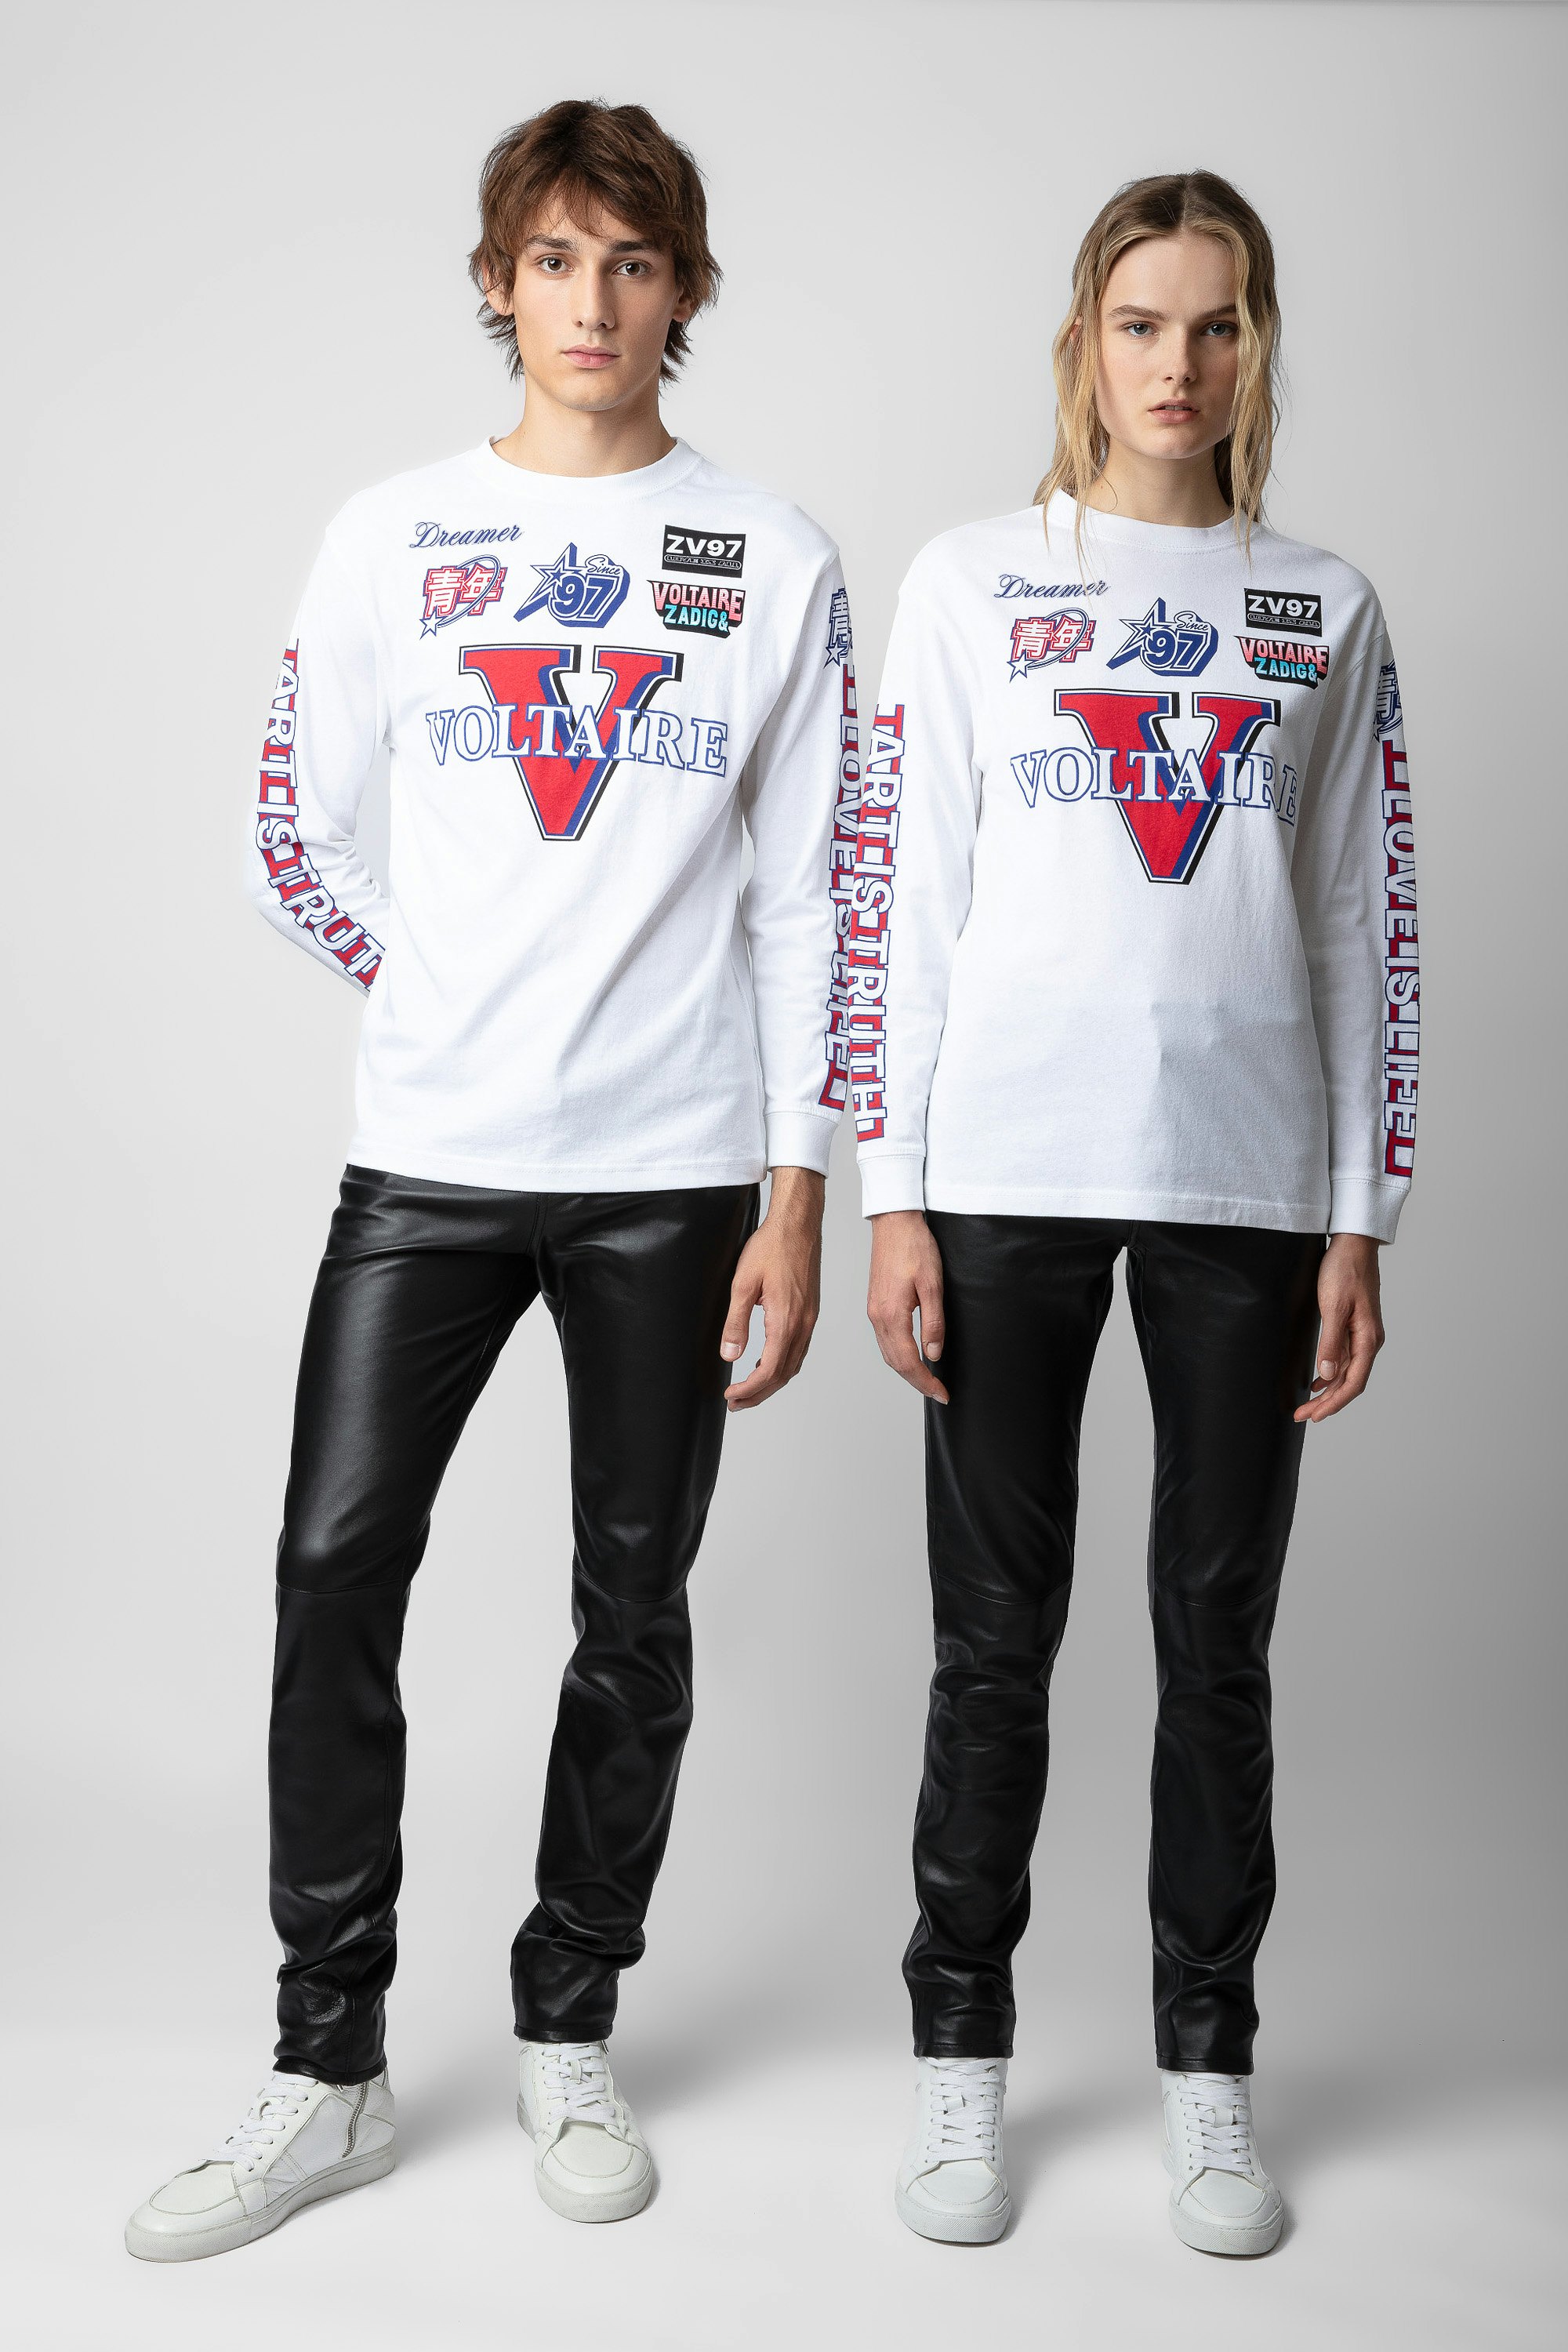 Noane Voltaire T-shirt - Unisex white cotton biker-style long-sleeved T-shirt with Voltaire badge motifs and elbow pads.